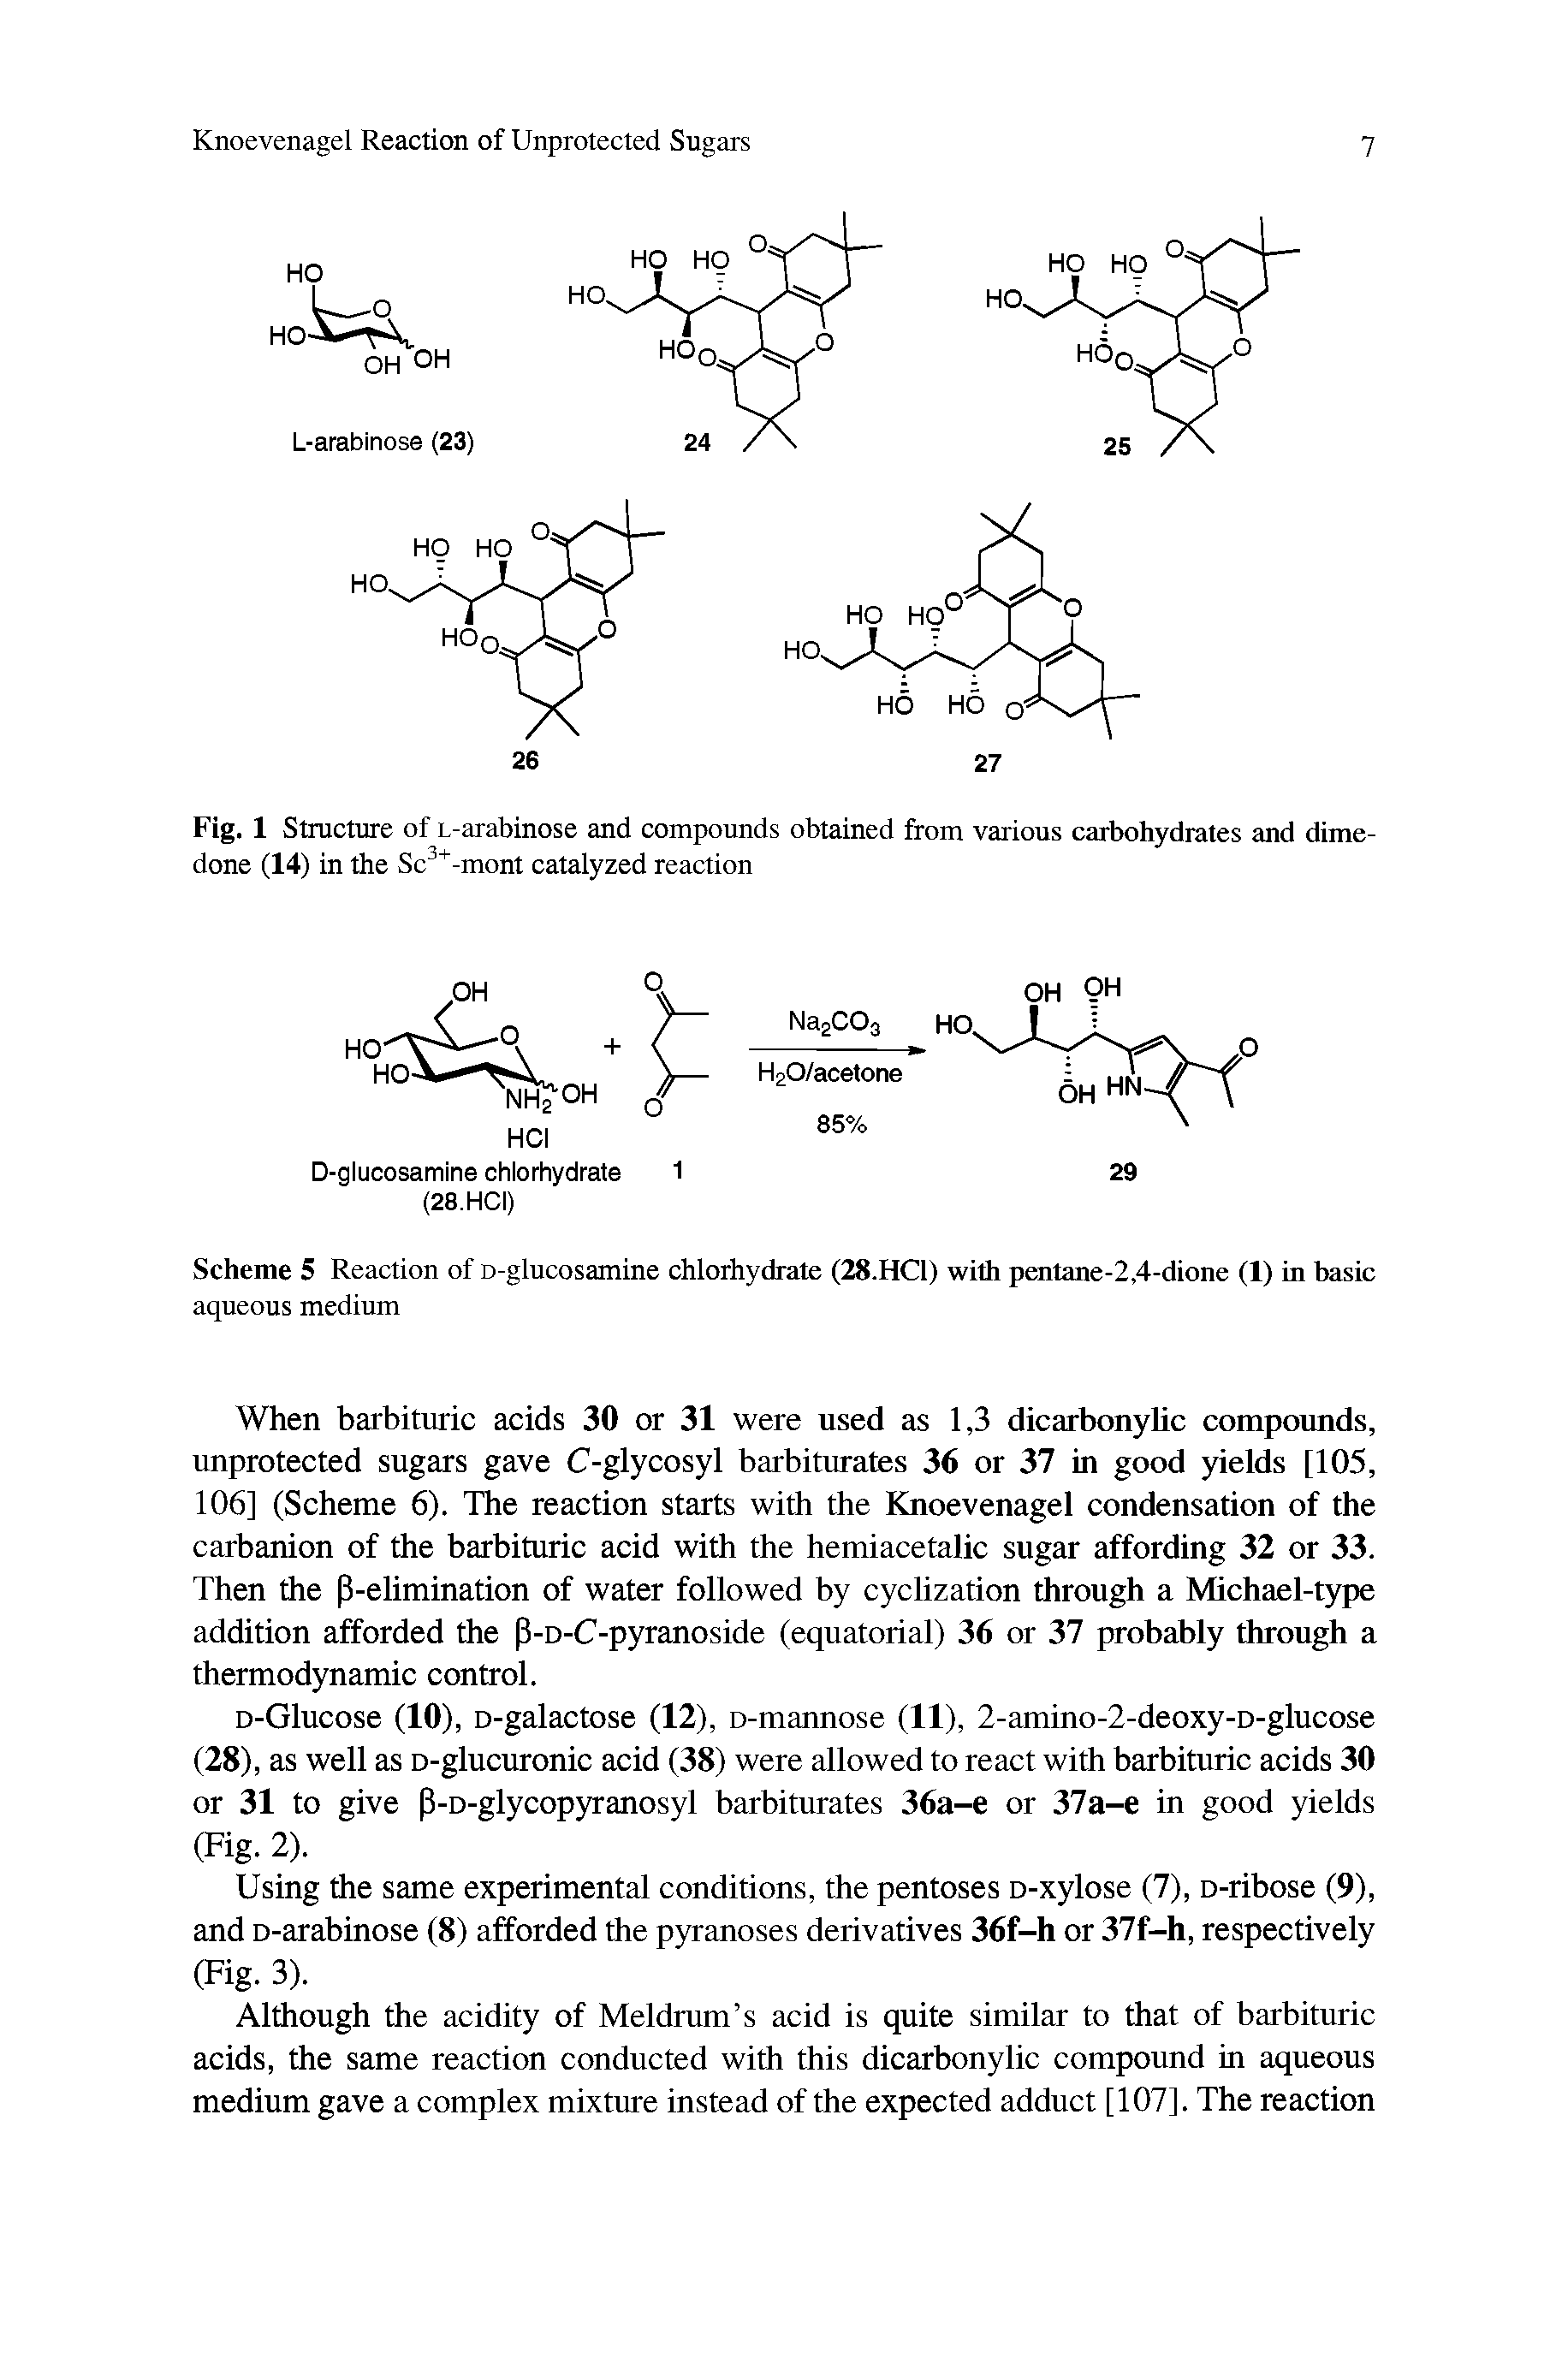 Fig. 1 Structure of L-arabinose and compounds obtained from various carbohydrates and dime-done (14) in the Sc -mont catalyzed reaction...